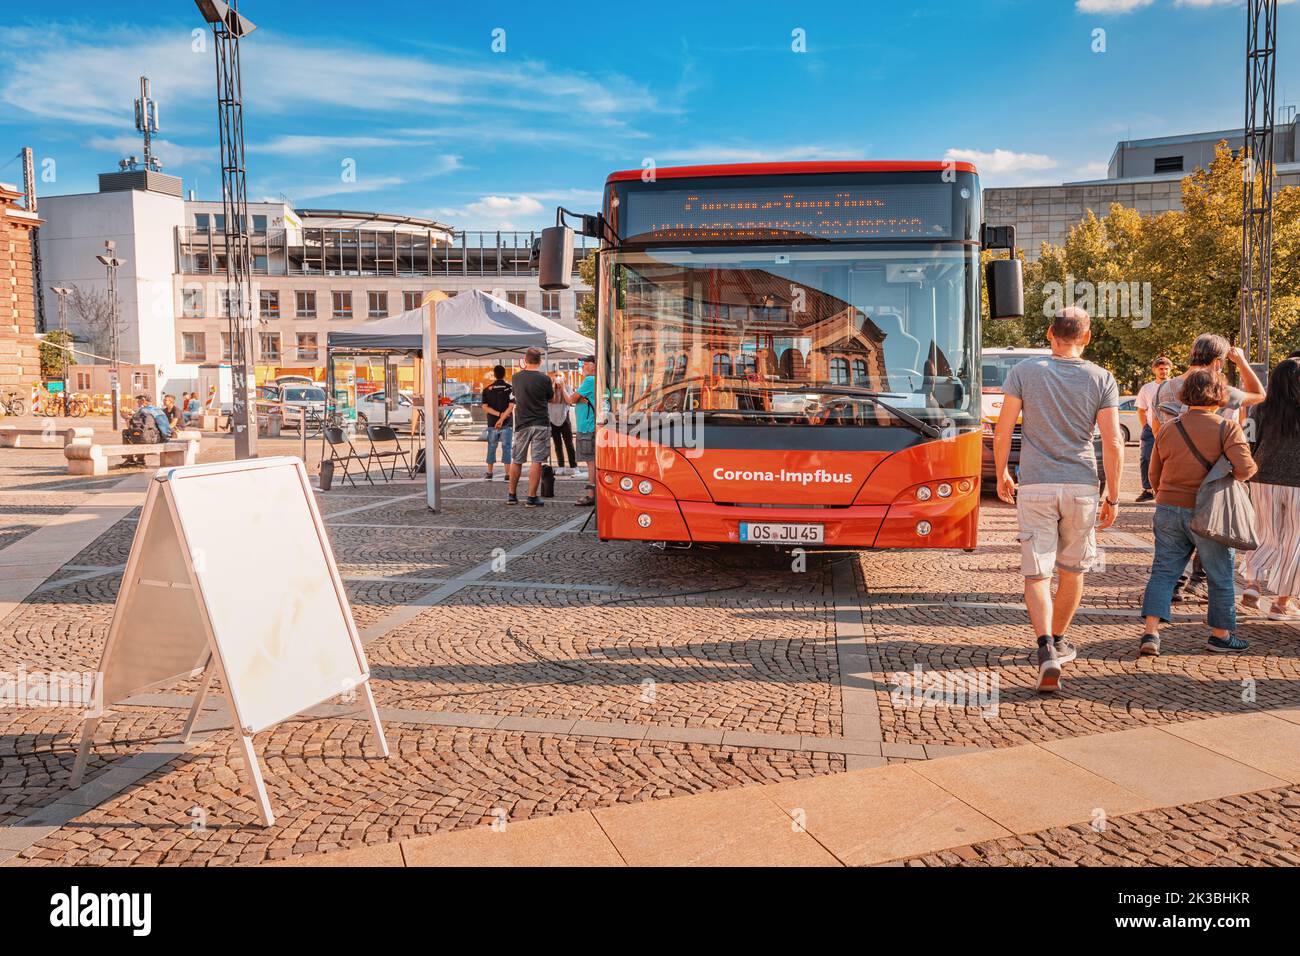 23 July 2022, Osnabruck, Germany: vaccination against covid-19 coronavirus on an Impfbus bus in a public square in the city. Epidemic safety and outbr Stock Photo